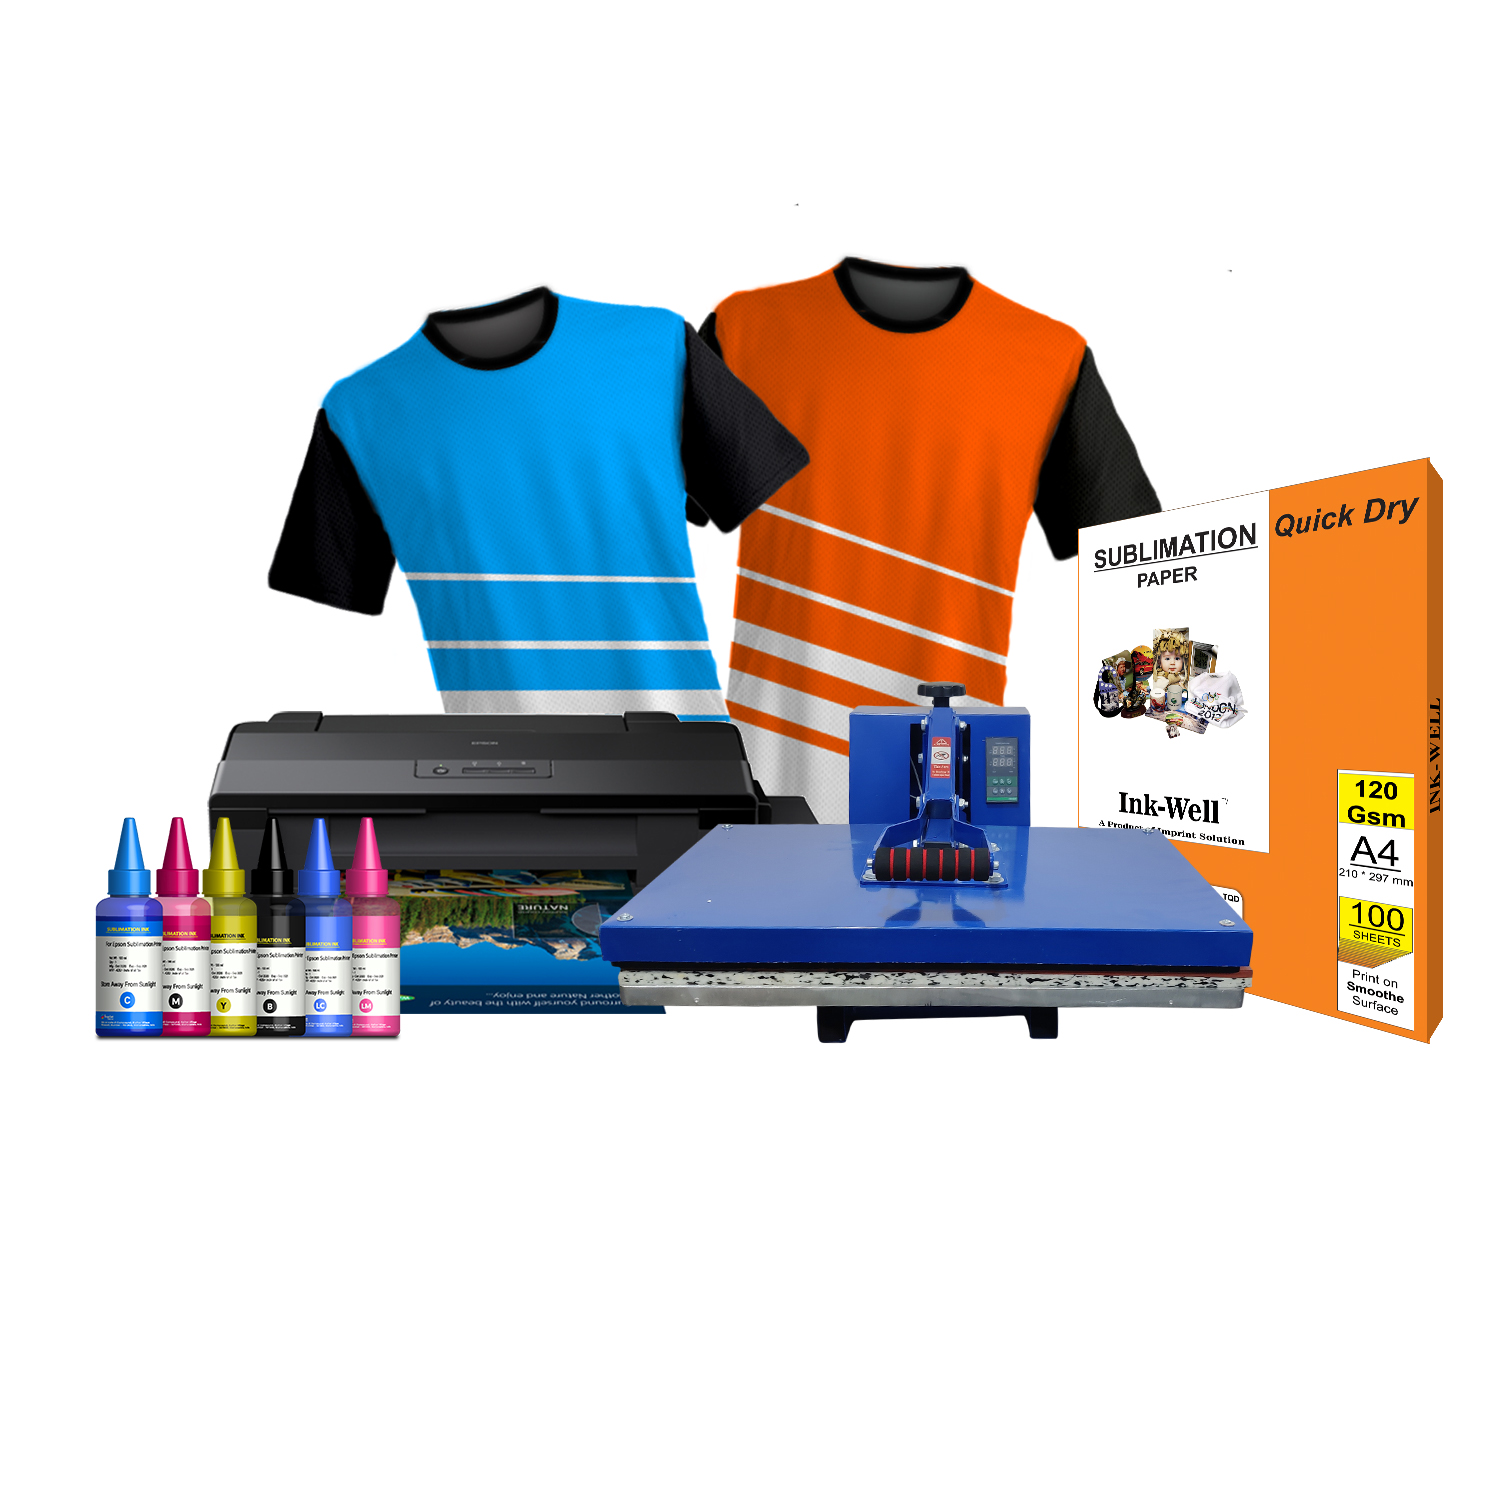 Sublimation Six color setup 1 IMPRINT SOLUTION We Imprint Solution Dealing With Printers, Inks, Papers https://imprintsolution.co.in/wp-content/uploads/2021/02/cropped-Imprint-logo-01-1.png